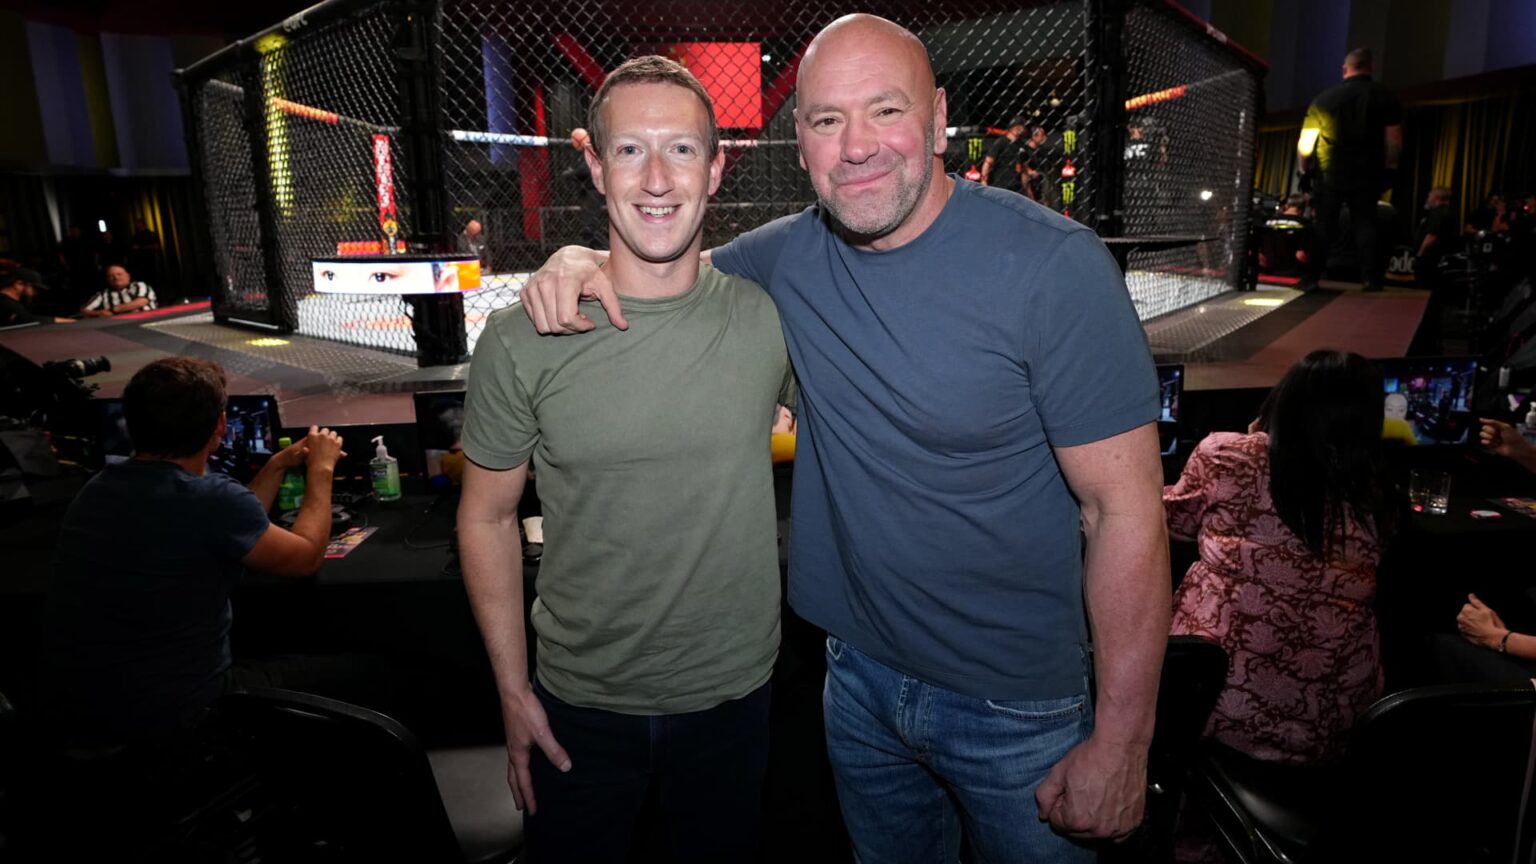 Meta CEO Mark Zuckerberg tore his ACL while training for a competitive MMA fight